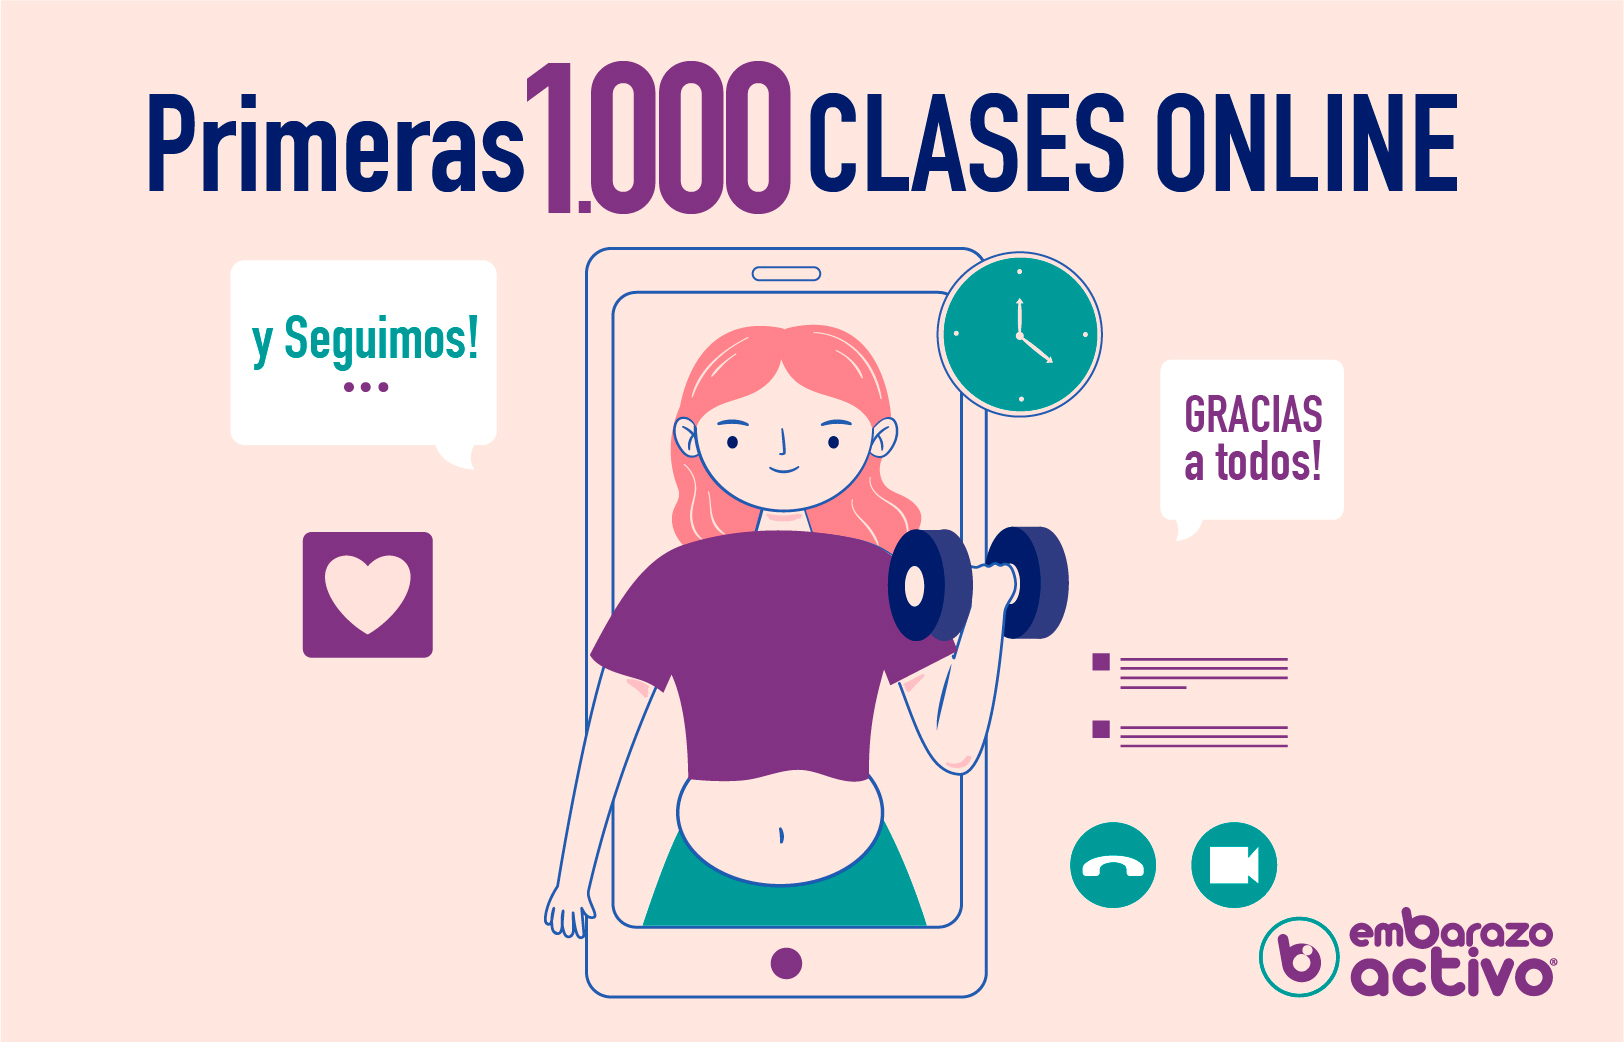 1000 clases online